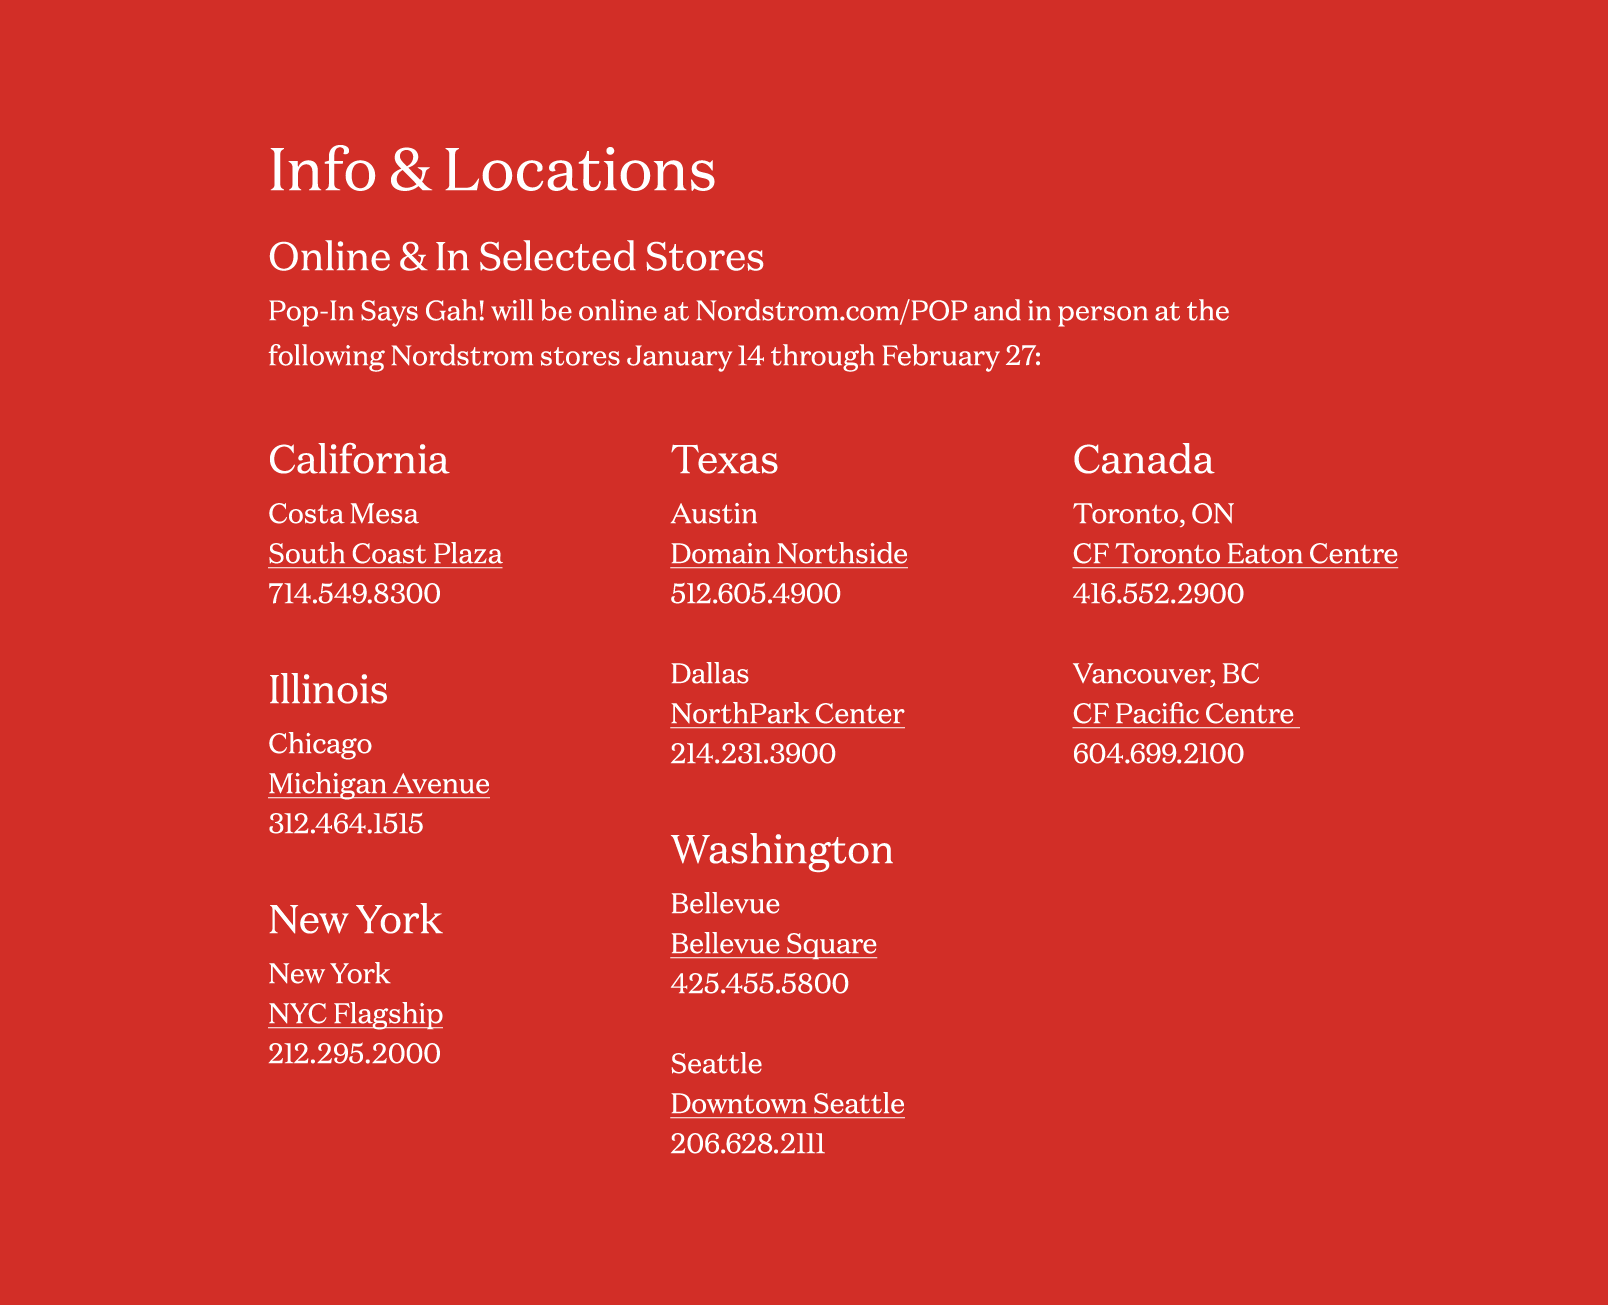 Pop-In info and locations.